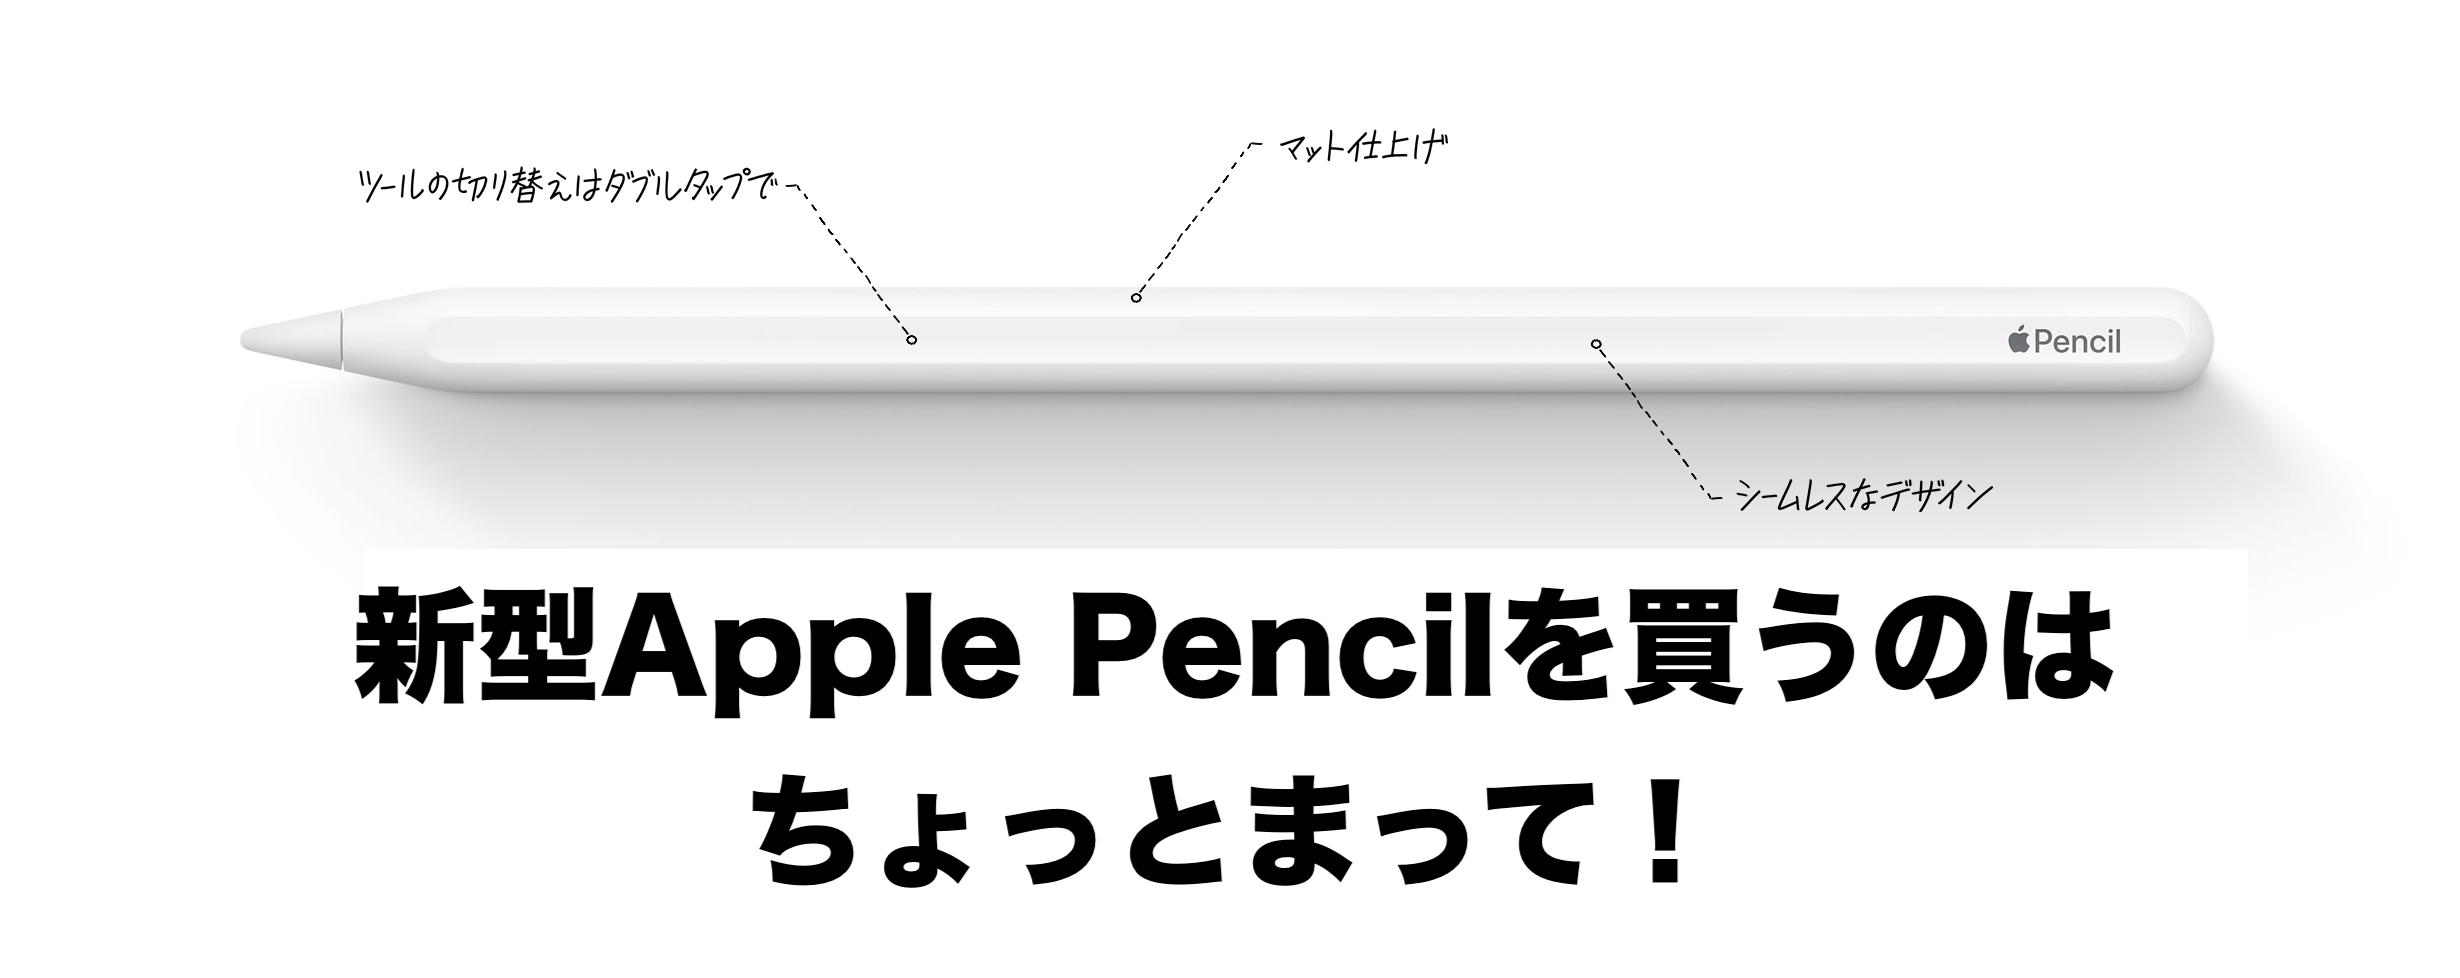 NEW ARRIVAL Apple pencil第二世代 agapeeurope.org